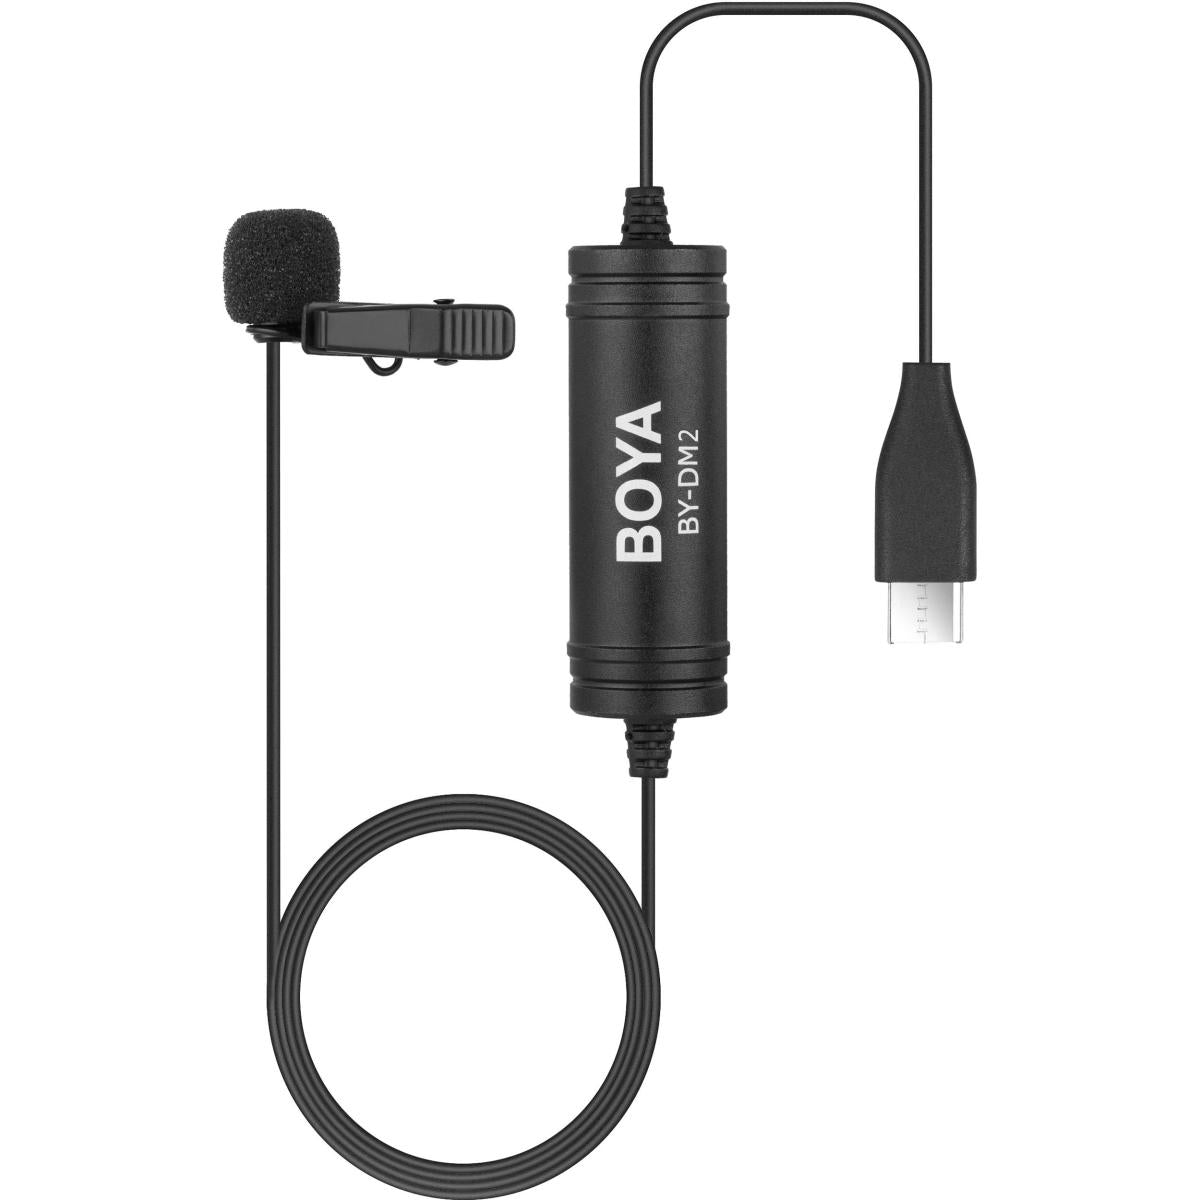 BOYA Digital Lavalier Microphone For Android Devices - Black